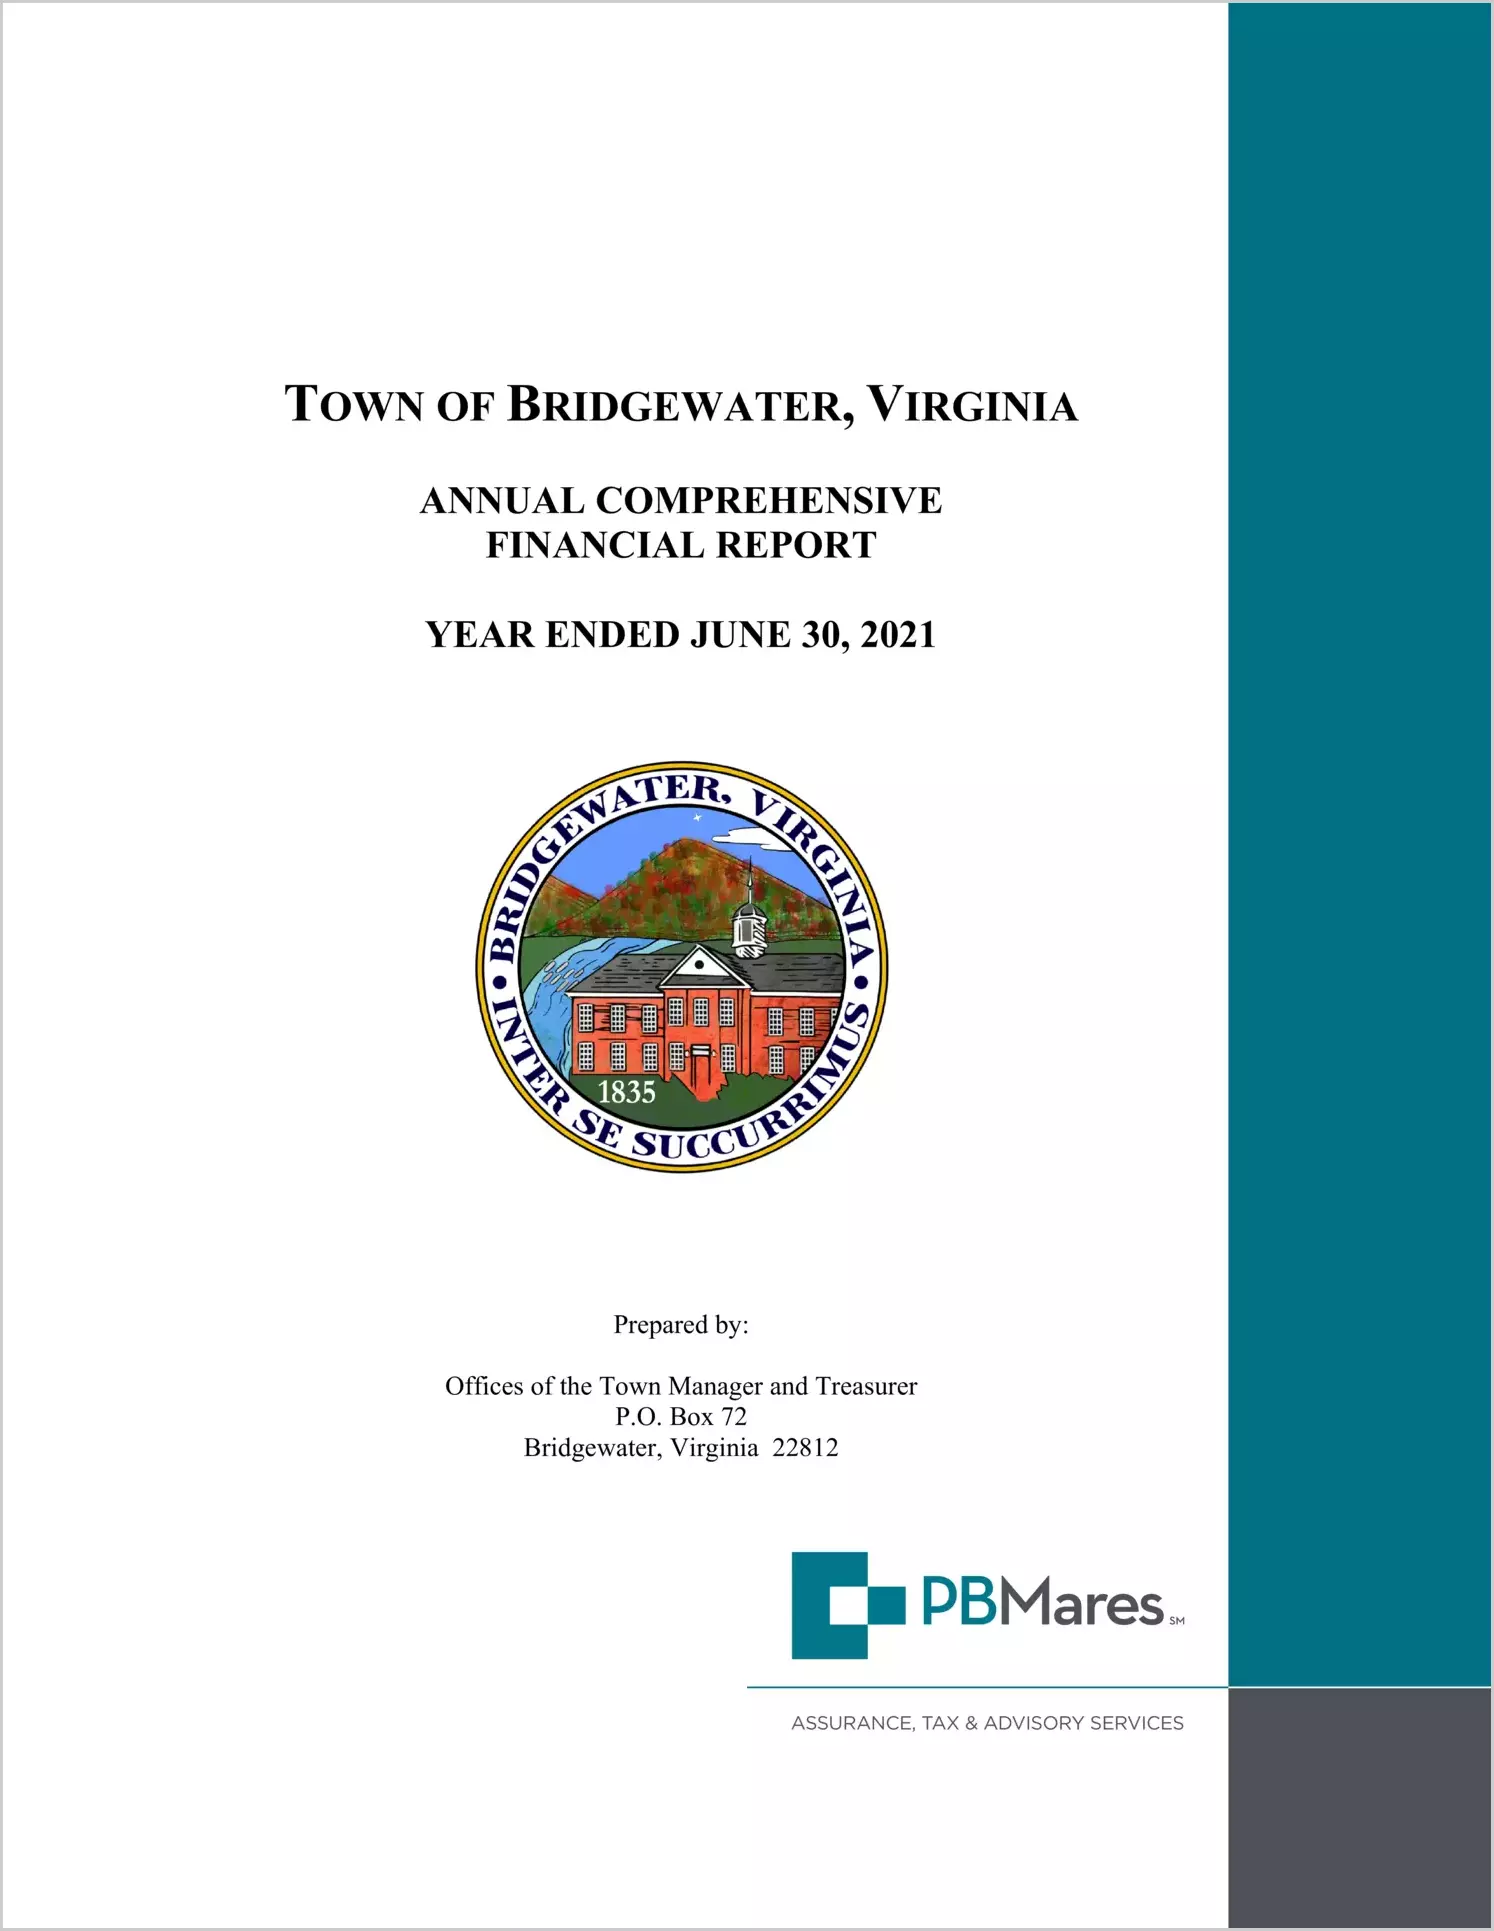 2021 Annual Financial Report for Town of Bridgewater